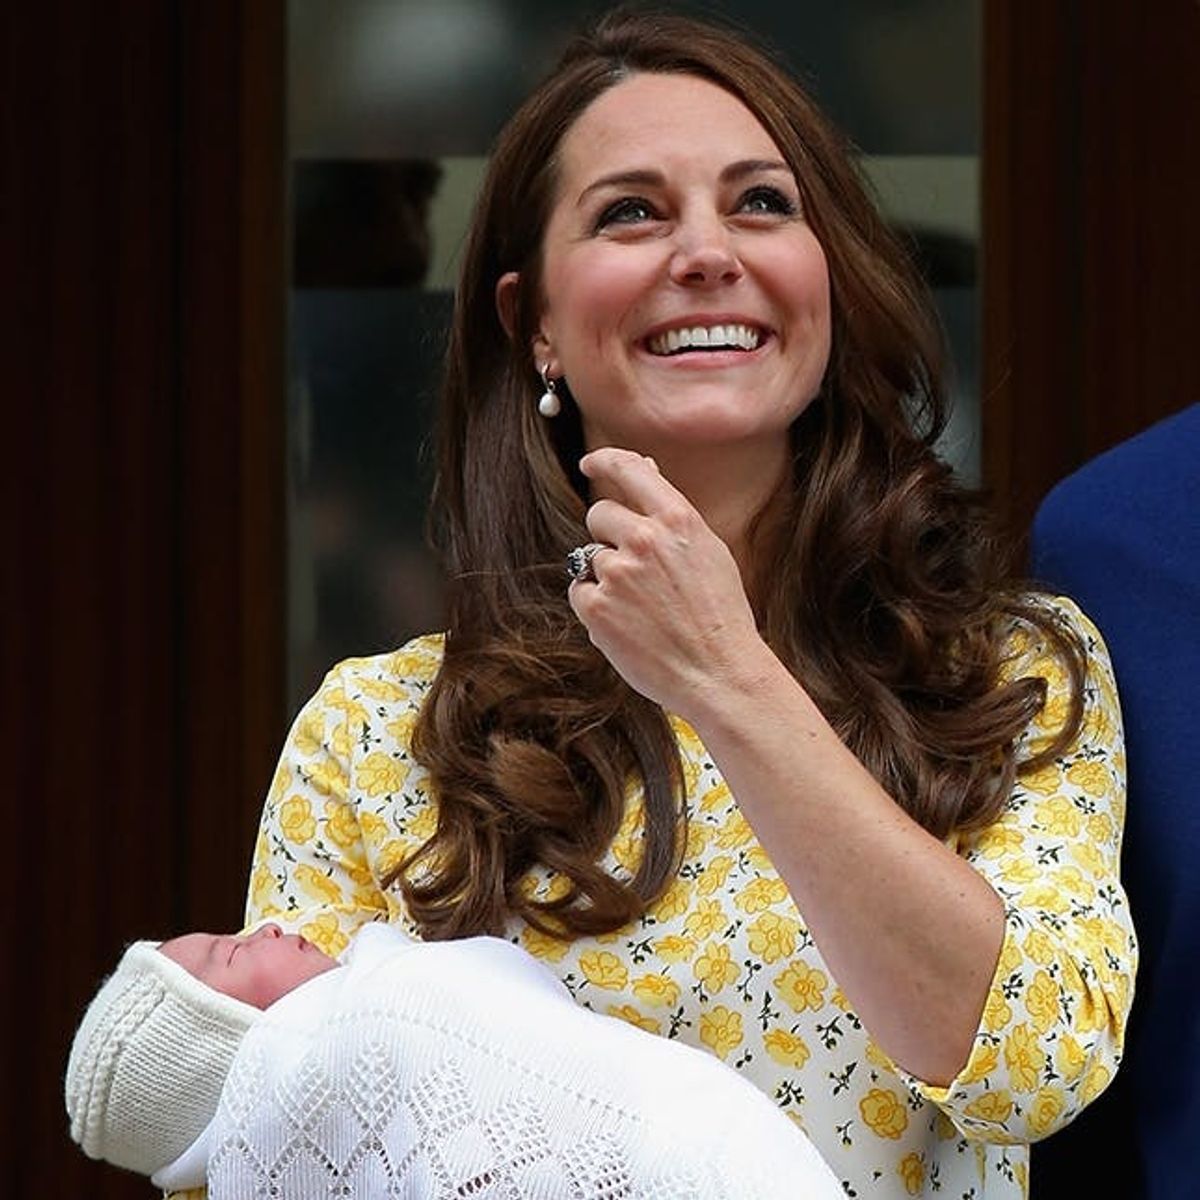 9 Dresses That Copy Kate Middleton’s New Mom Style